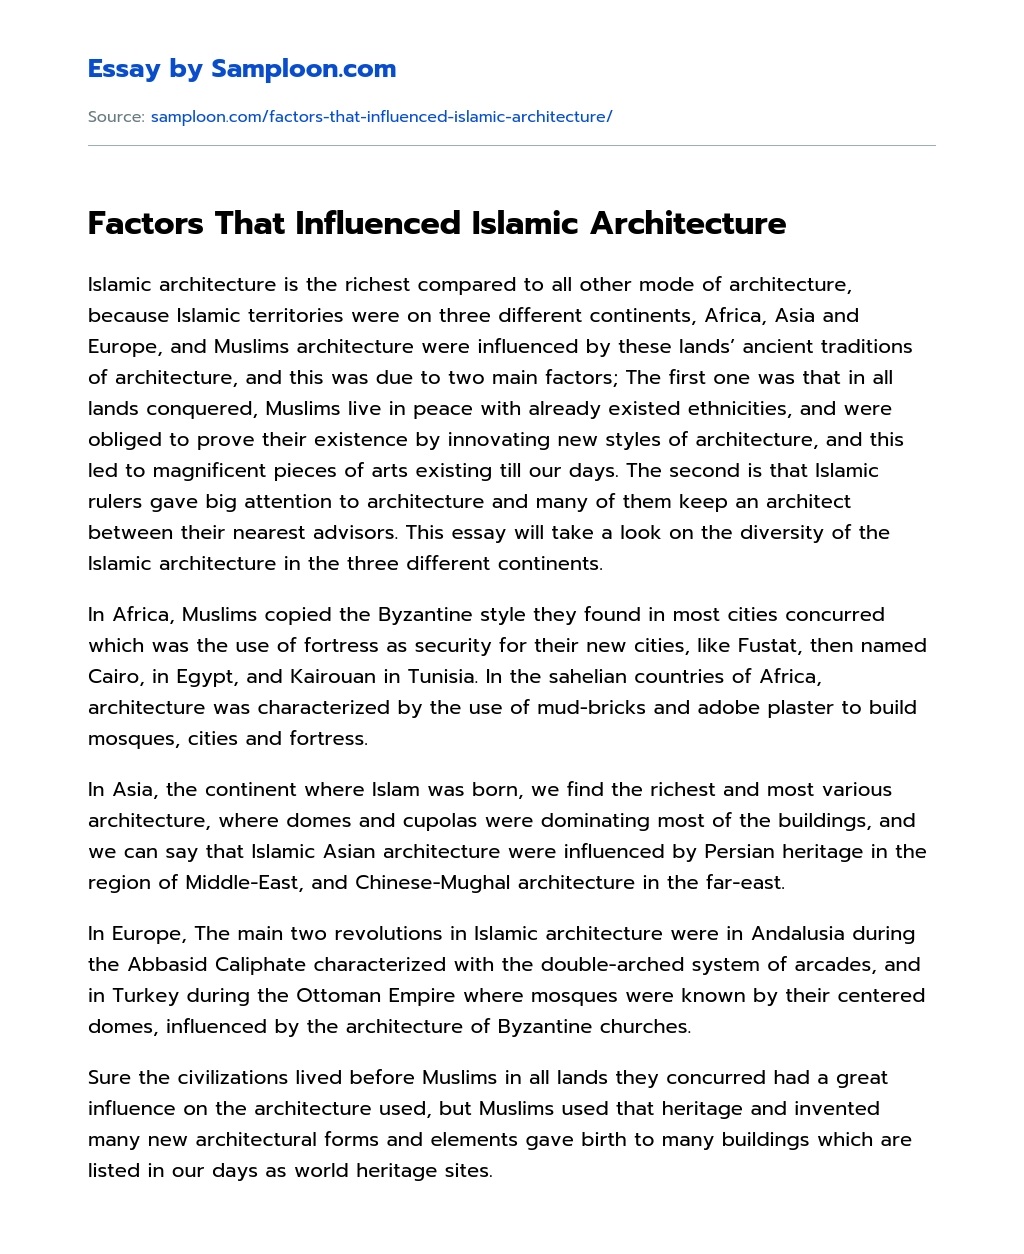 Factors That Influenced Islamic Architecture essay